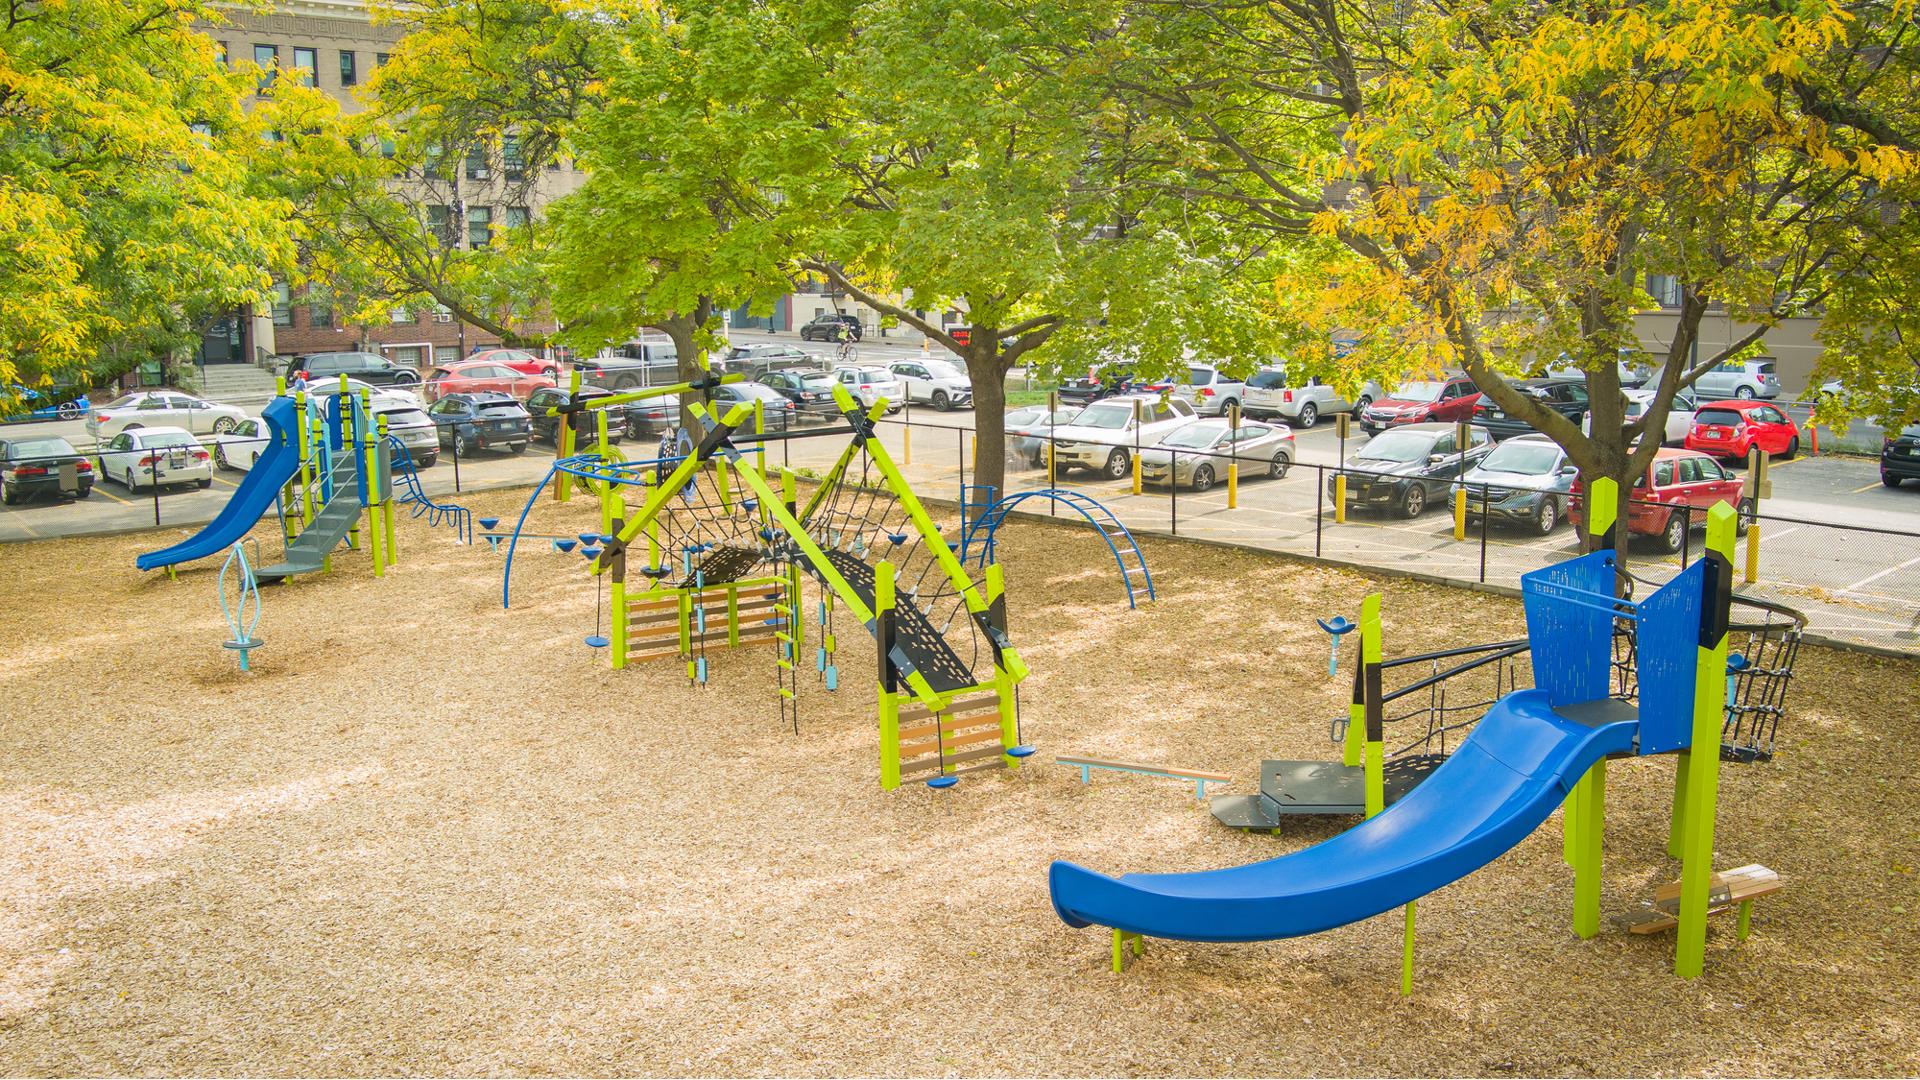 Elevated view of a city elementary school playground with three separate main play structures surrounded by mature trees and a parking lot.